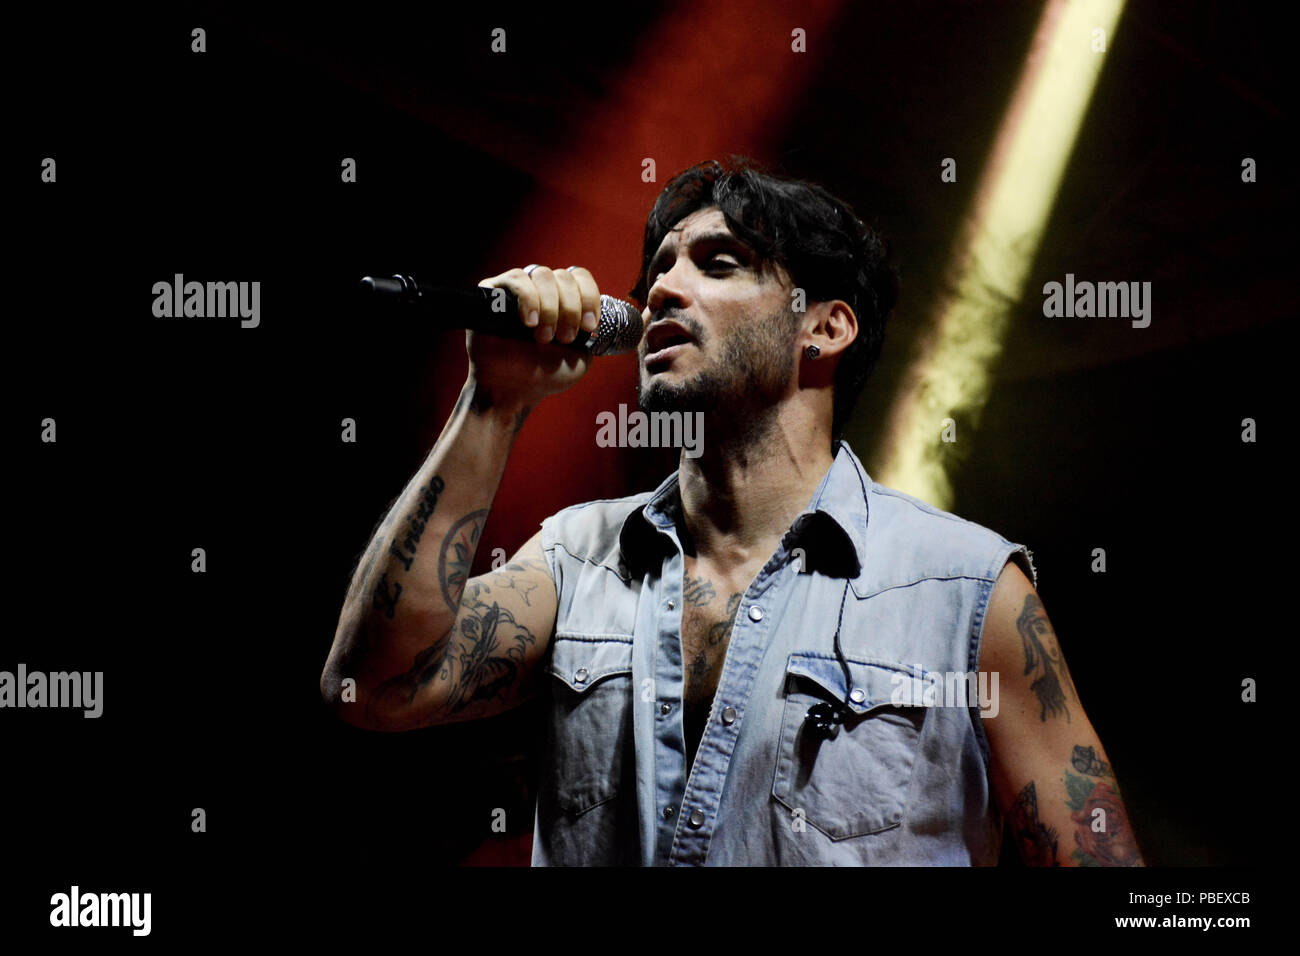 Naples, Italy. 28th July, 2018. The italian singer-songwriter Fabrizio Moro, last winner of Sanremo Festival 2018,  performing live on stage at Arenile di Bagnoli in Naples, Italy for his concert  'Tour 2018'. Credit: Mariano Montella/Alamy Live News Stock Photo